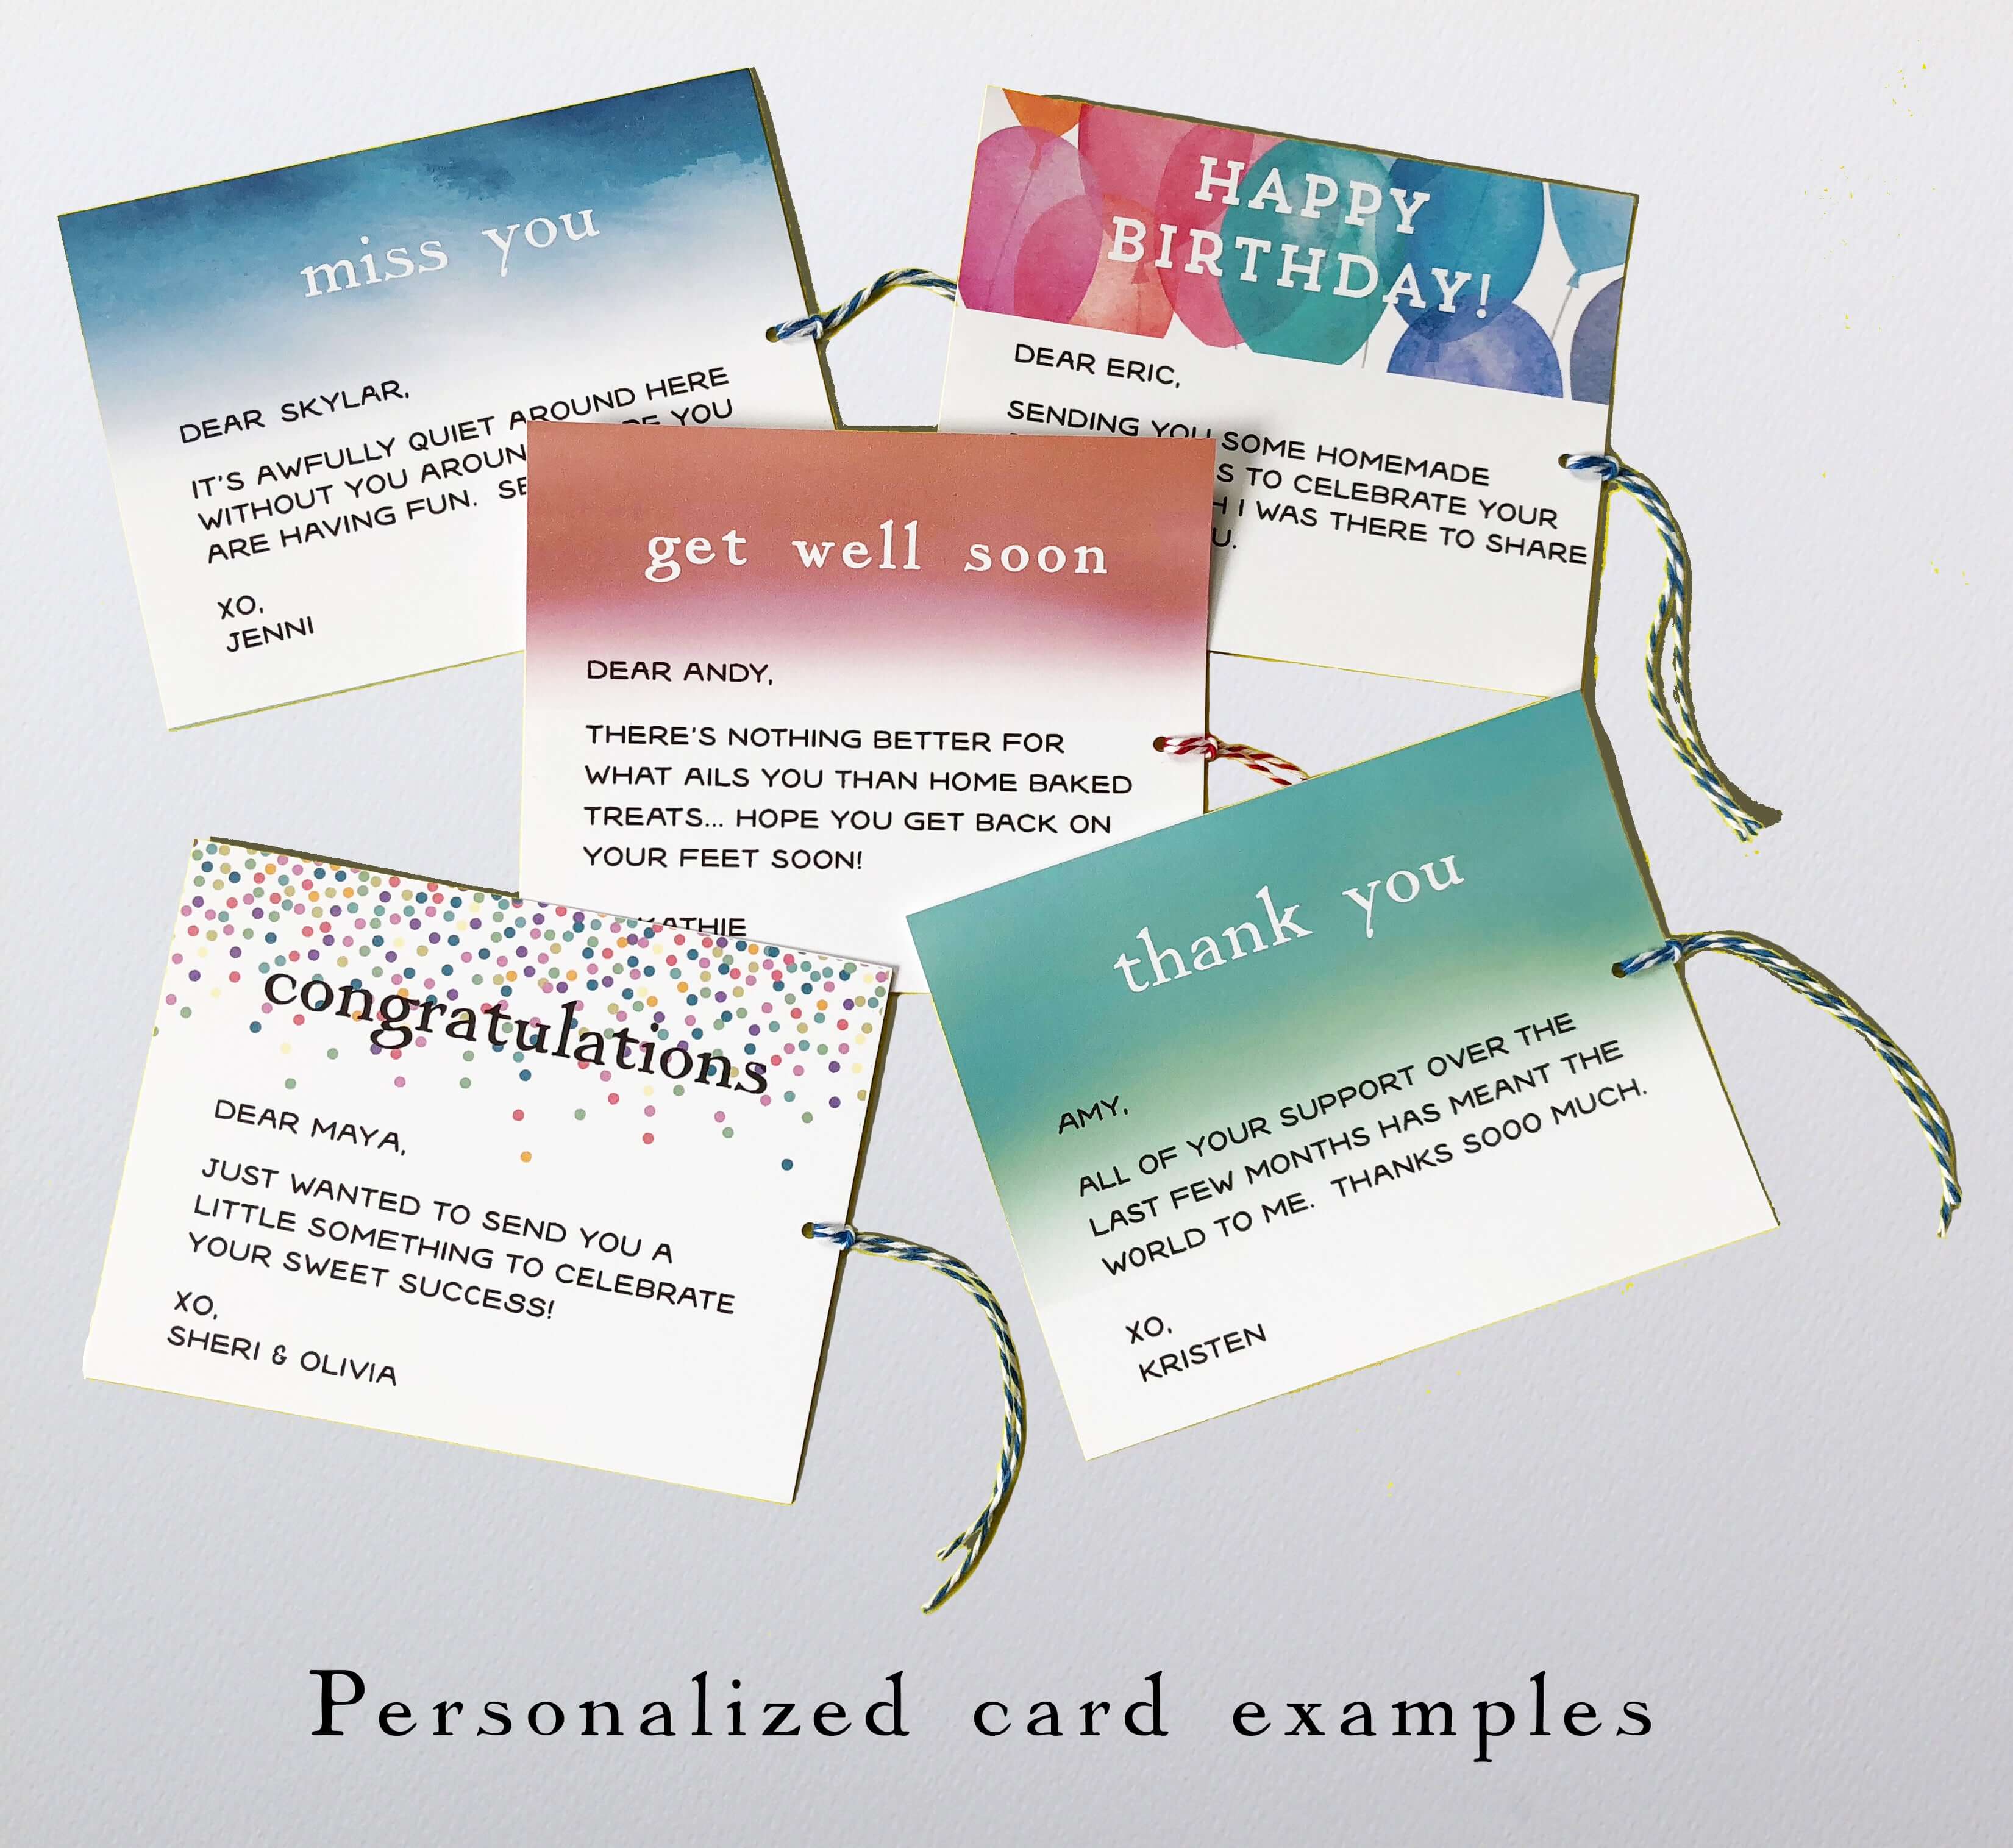 Examples of personalized cards with customer photo uploads. The card is enclosed in a translucent envelope inside the box top flap. Bakers twine allows the card to be pulled out and displayed on a bulletin board or refrigerator.